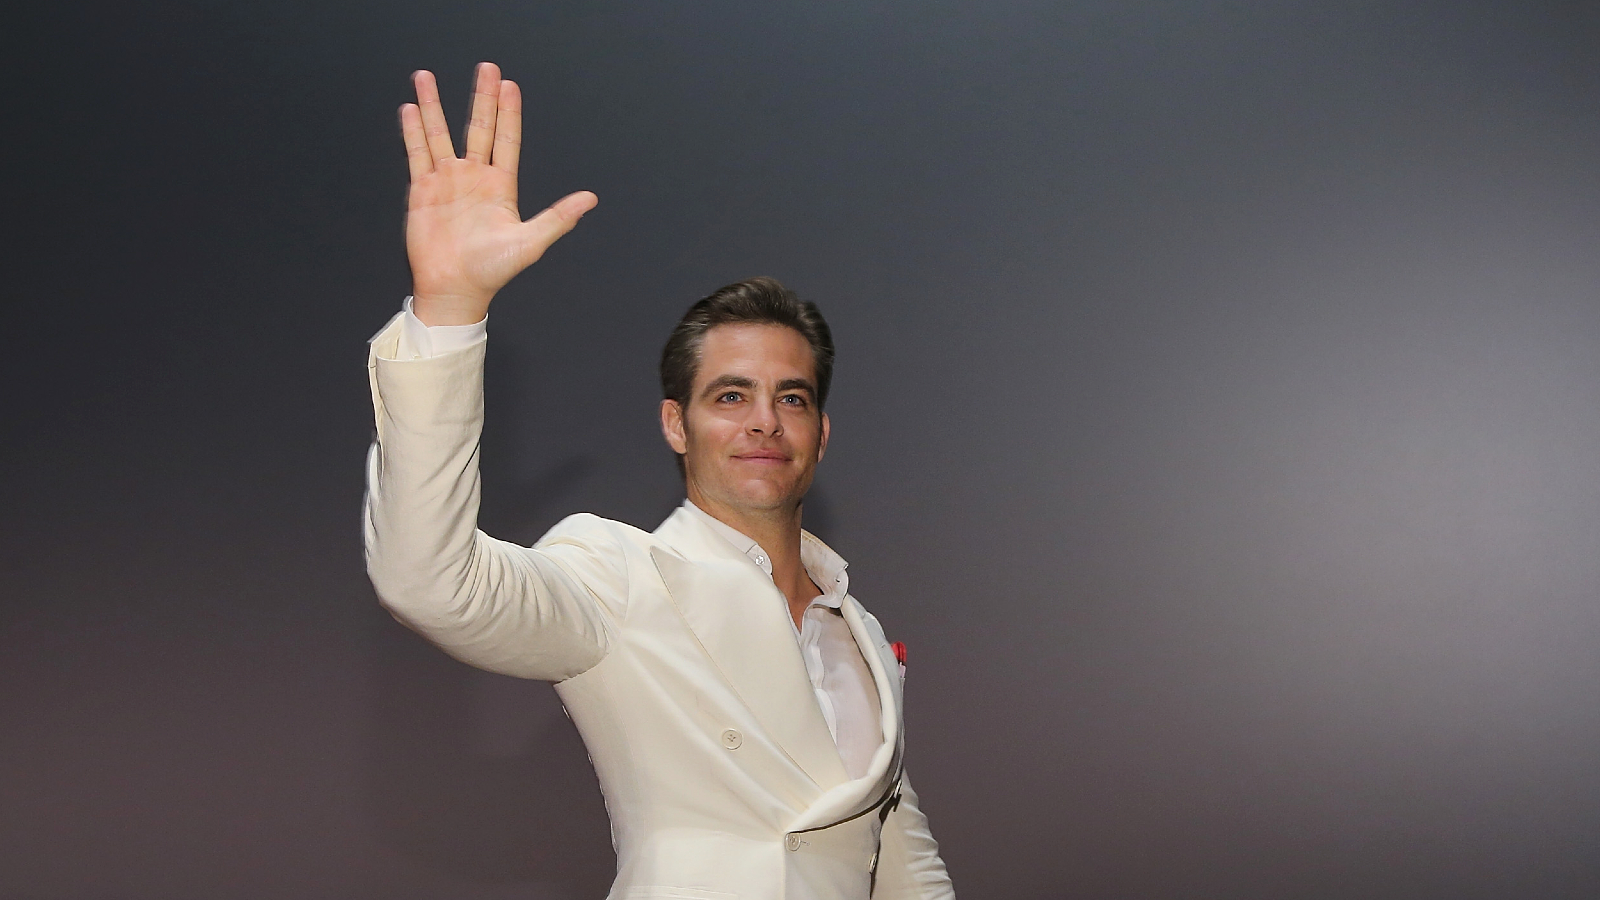 How tall is Chris Pine? Is he the tallest Captain Kirk?